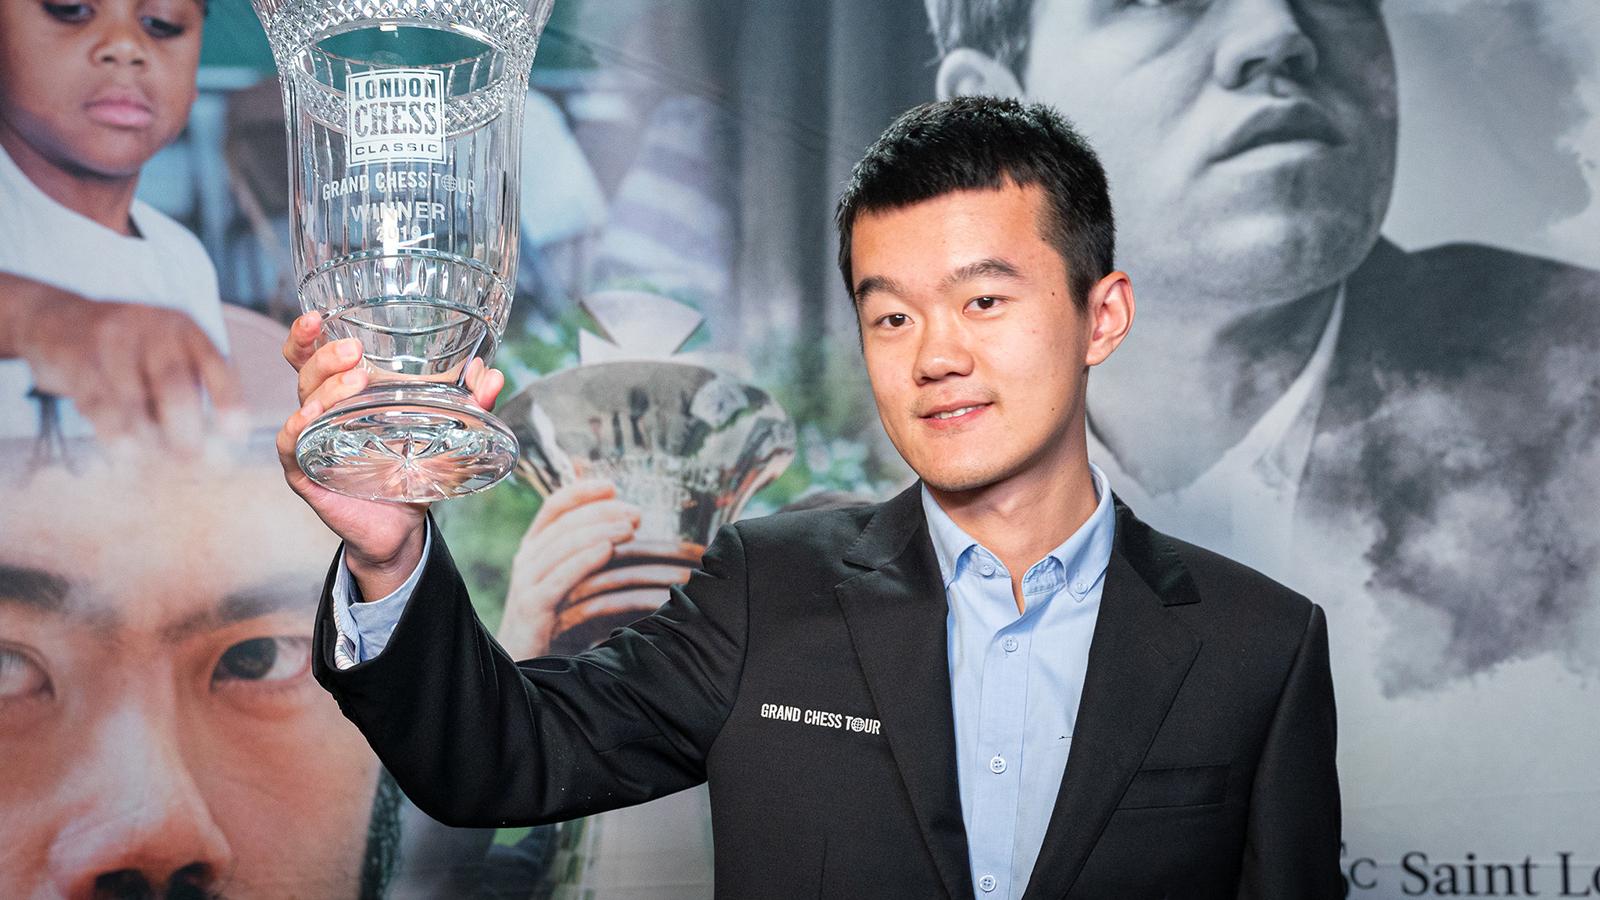 World Chess championship: Ding Liren stuns with miracle win over